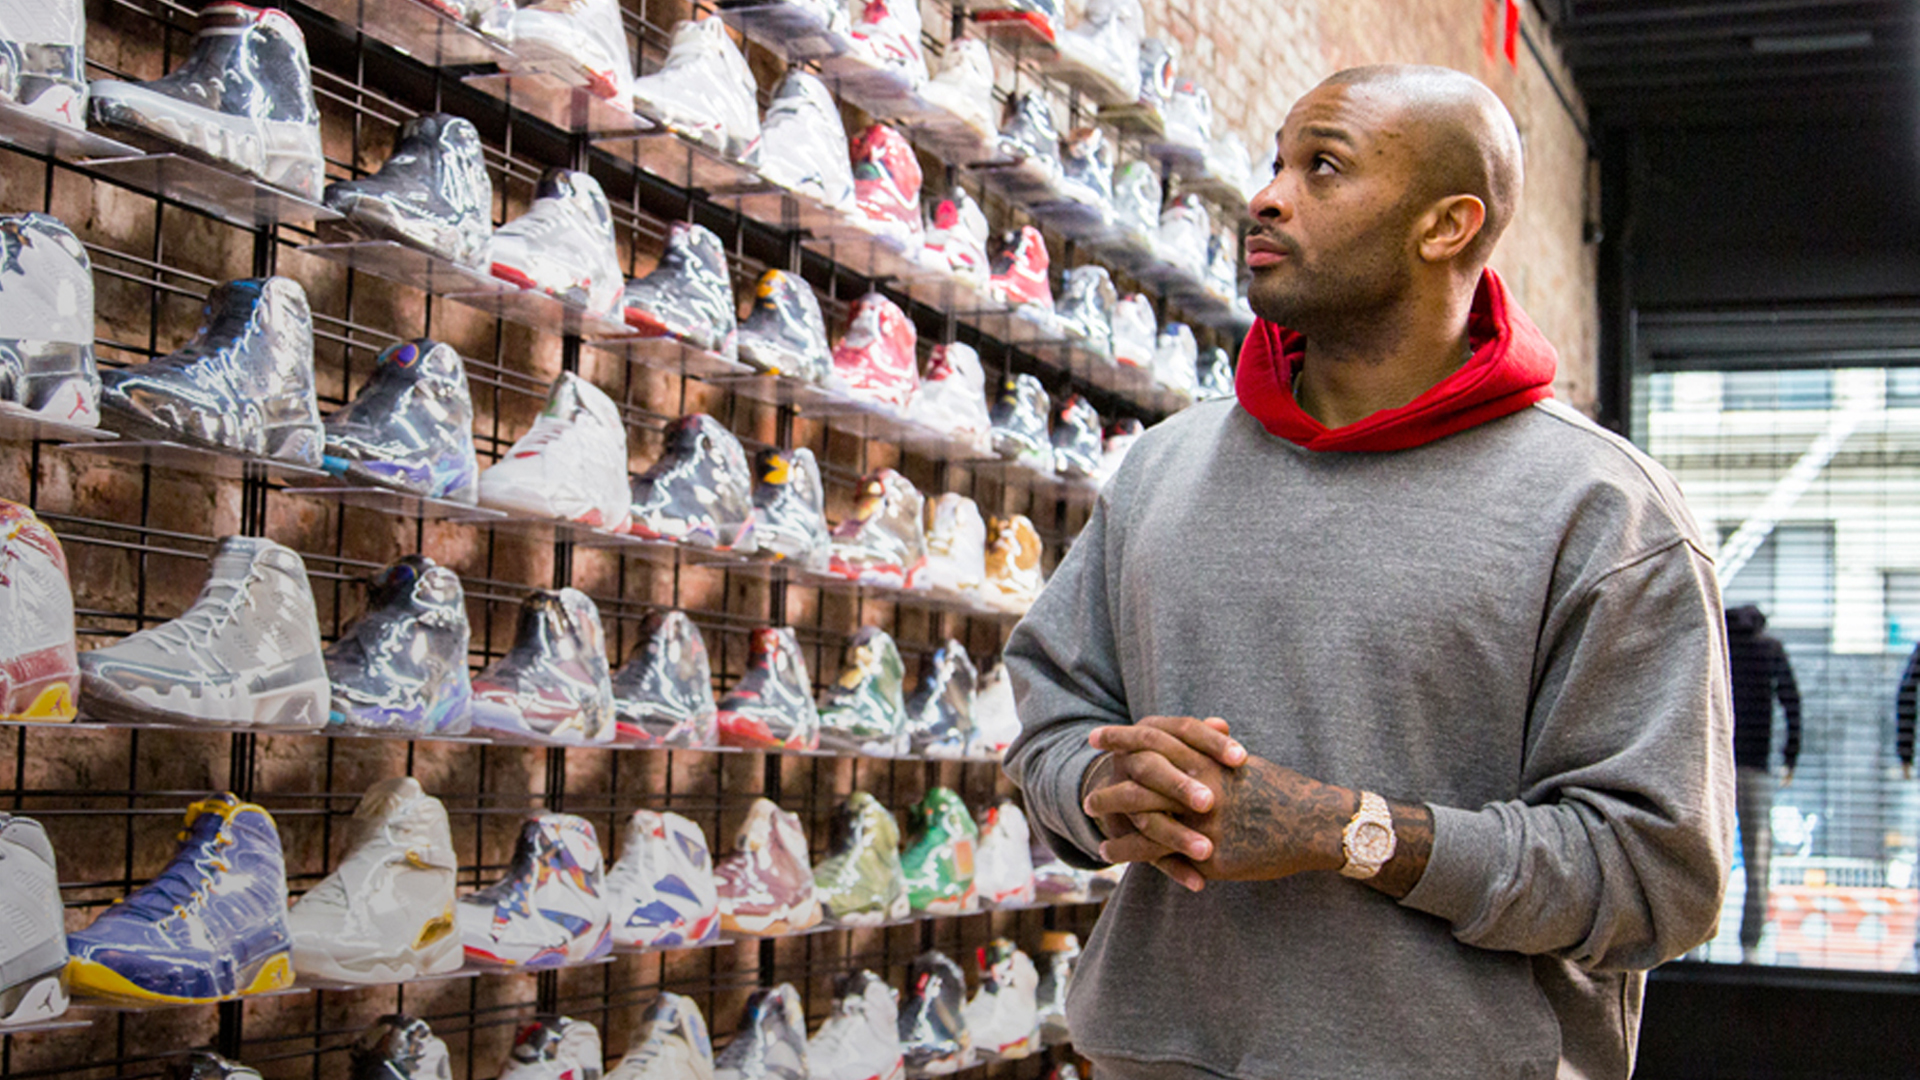 P. J. Tucker Interview - NBA Star on Sneaker Collecting and  Sale of  Shoes